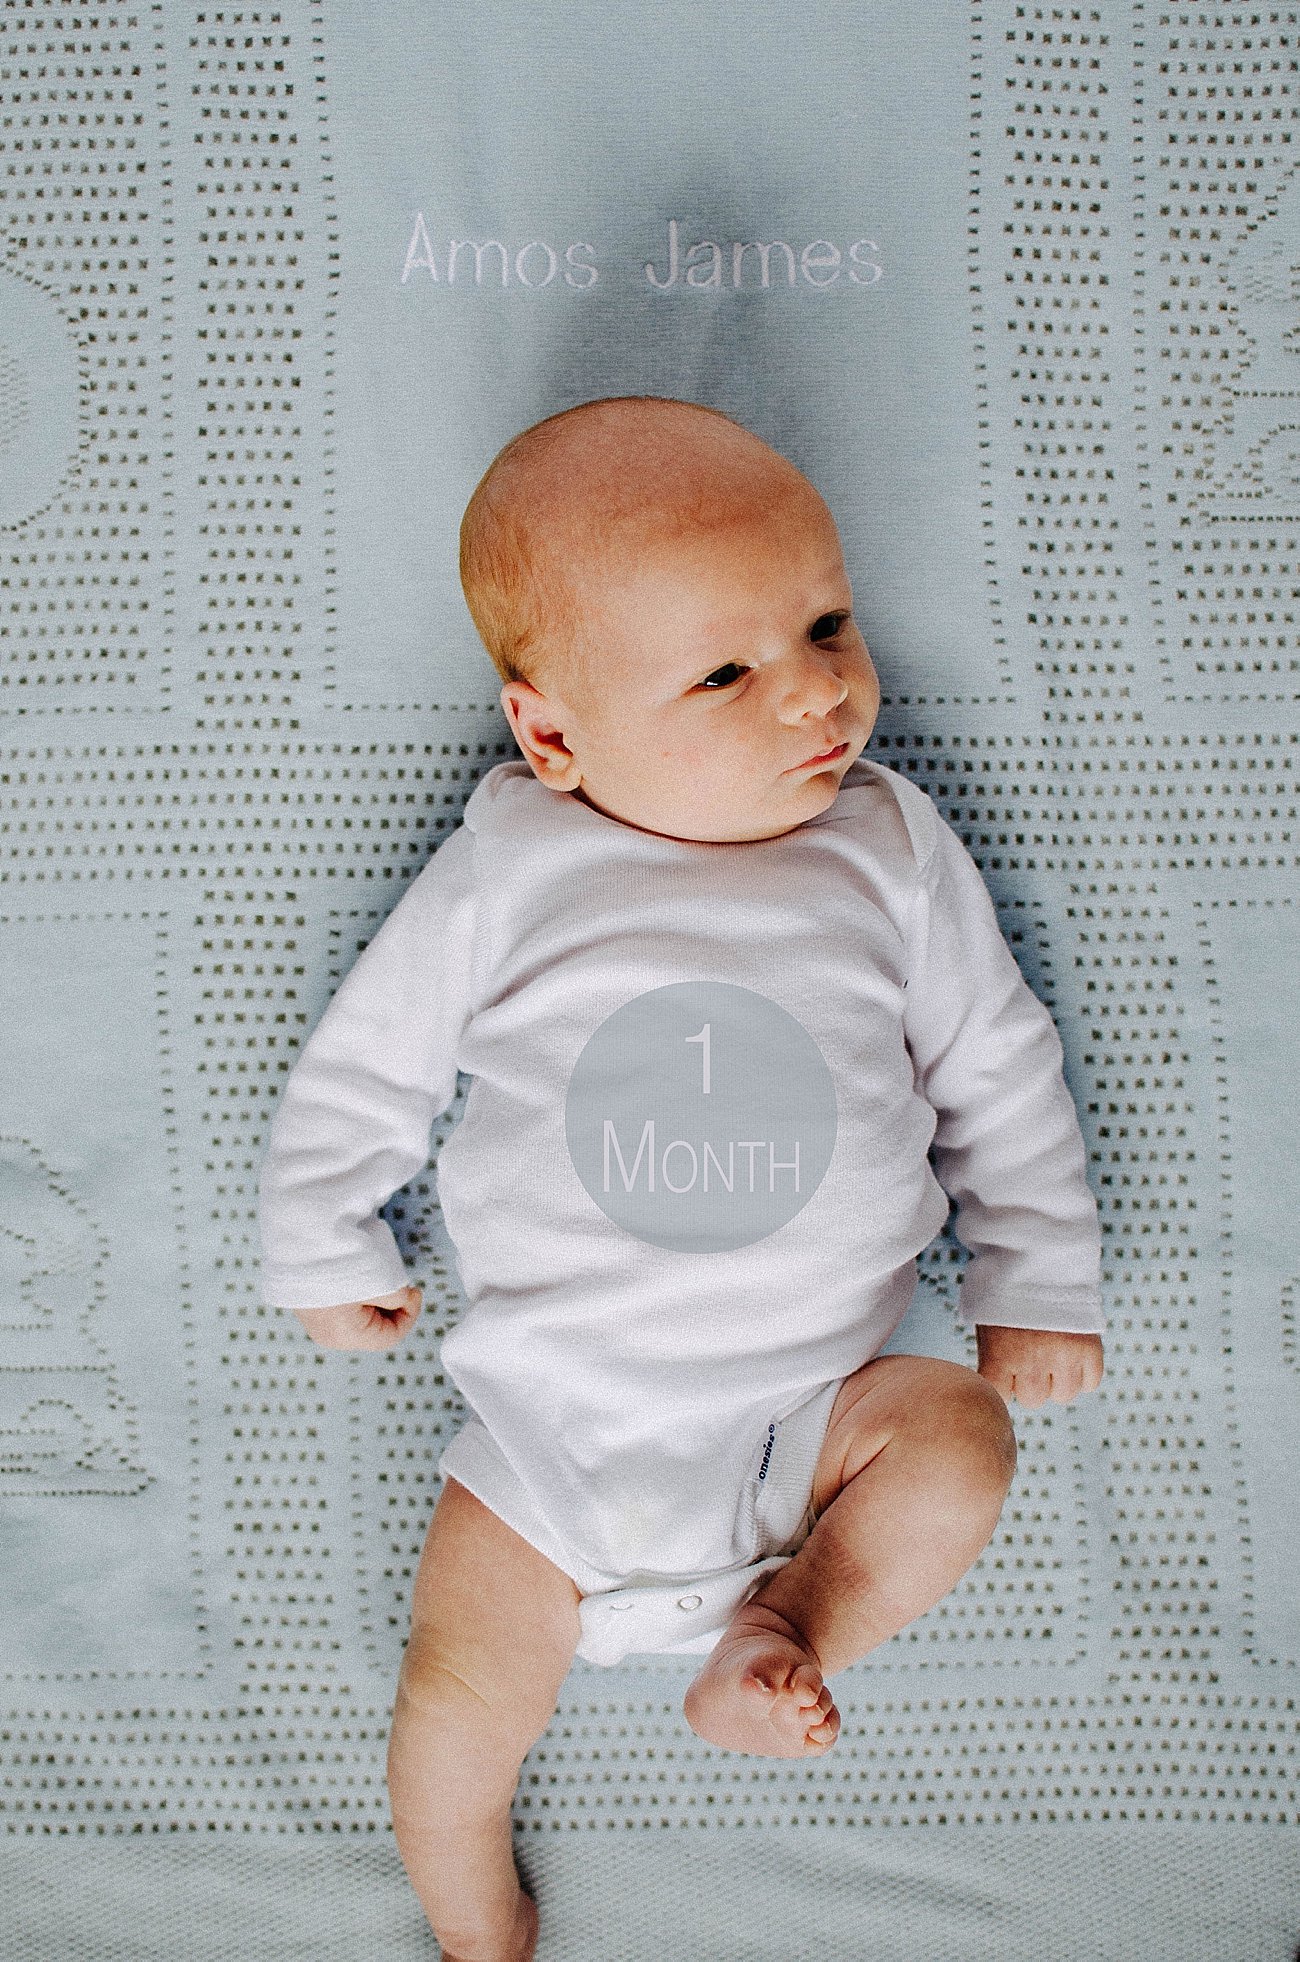 Amos James - One Month Old (13)